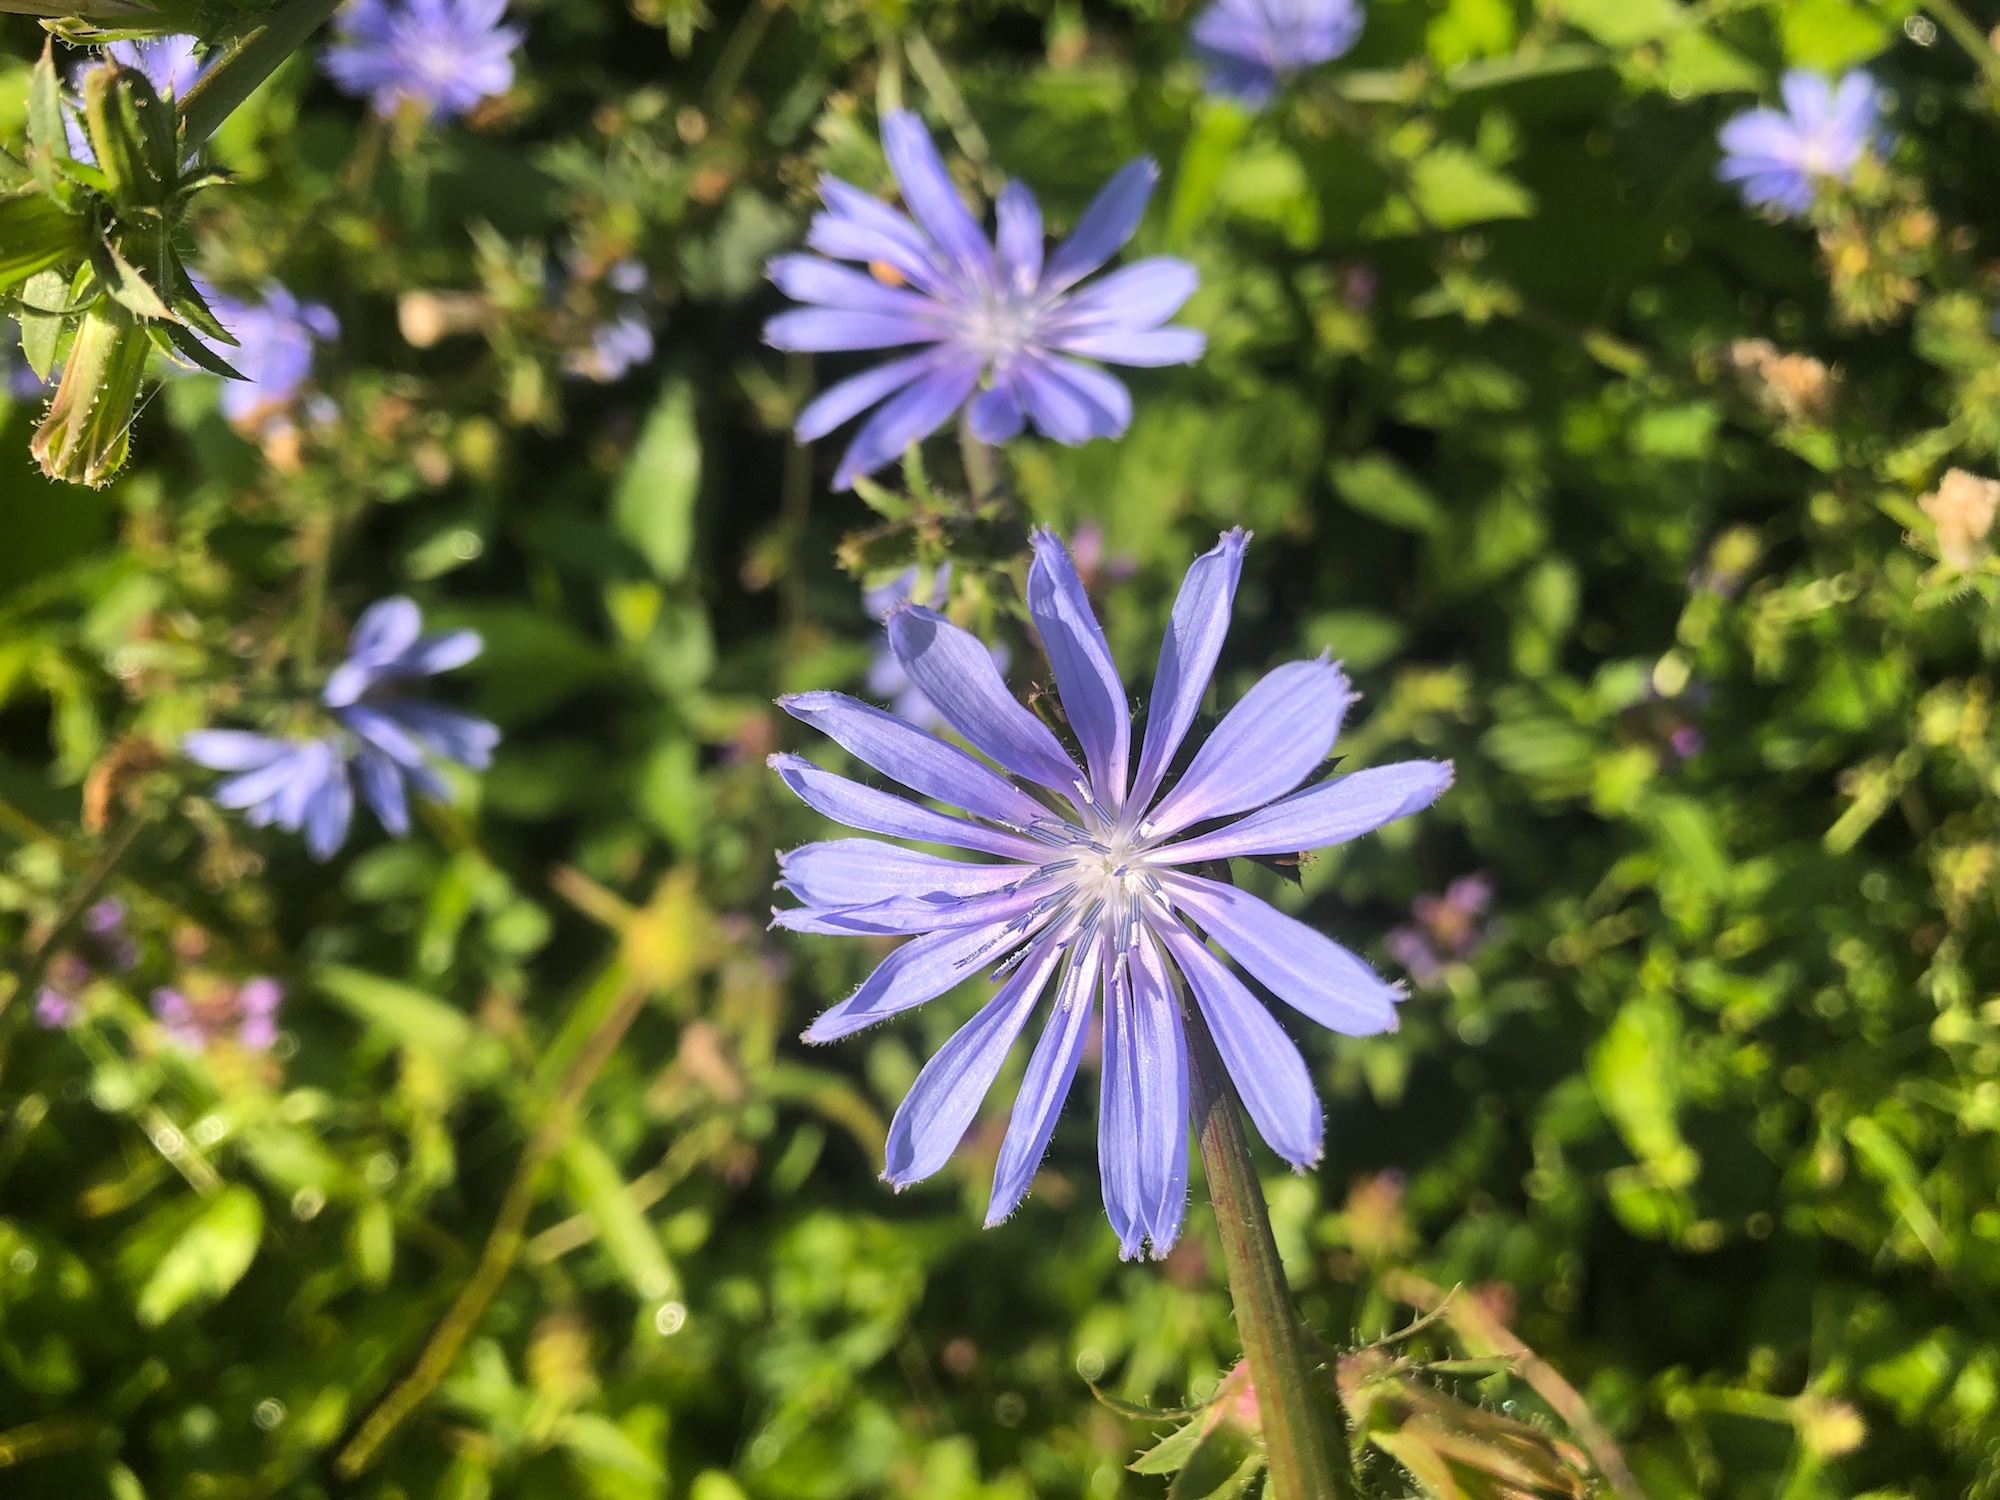 Chicory in Marion Dunn Prairie in Madison, Wisconsin on July 31, 2019.